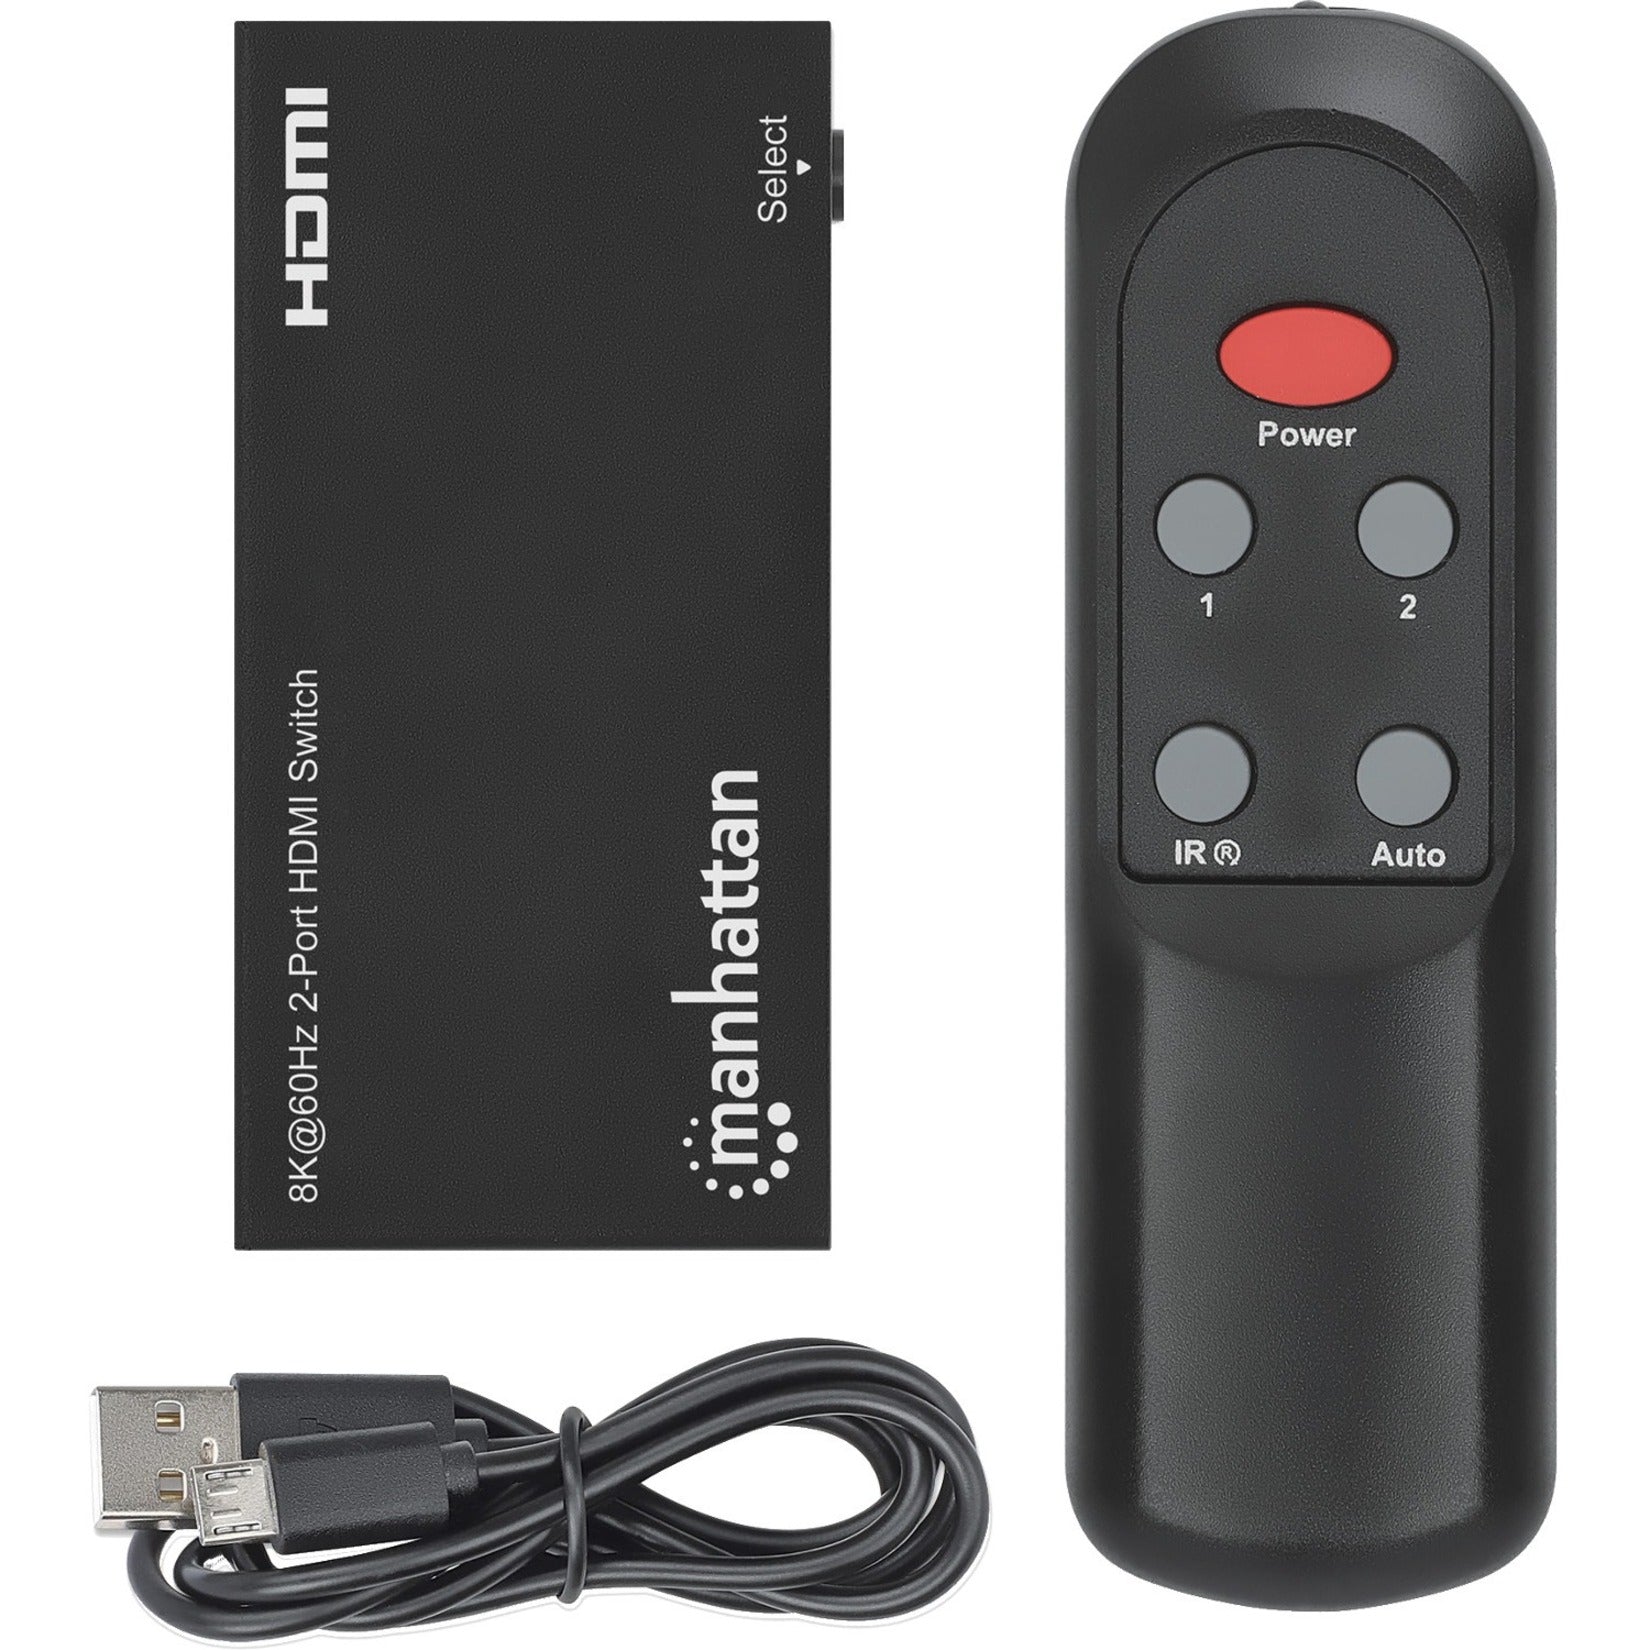 Manhattan 207942 8K@60Hz 2-Port HDMI Switch, Supports Ultra HD Video and Easy Connectivity